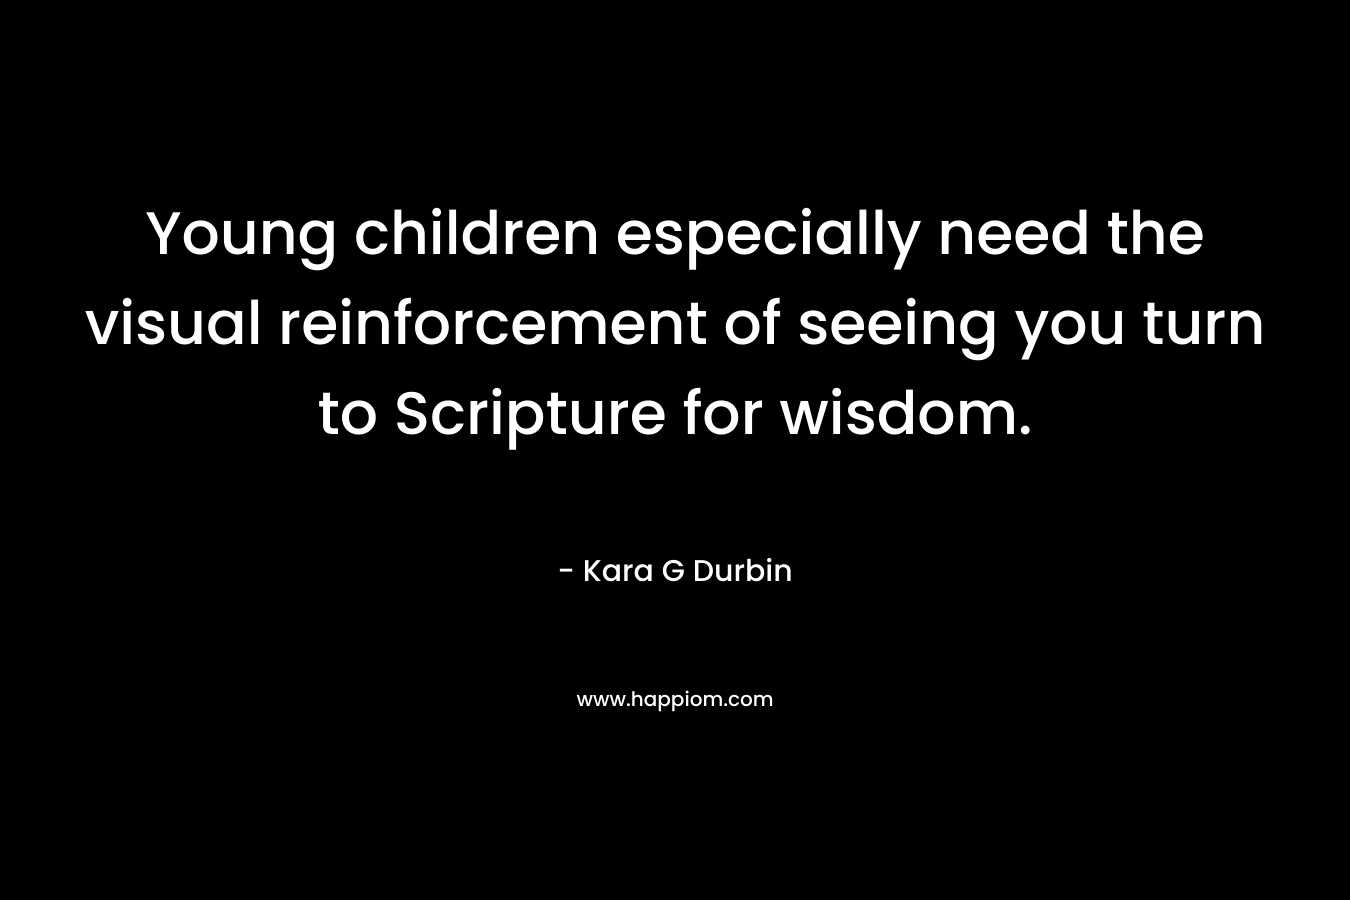 Young children especially need the visual reinforcement of seeing you turn to Scripture for wisdom. – Kara G Durbin